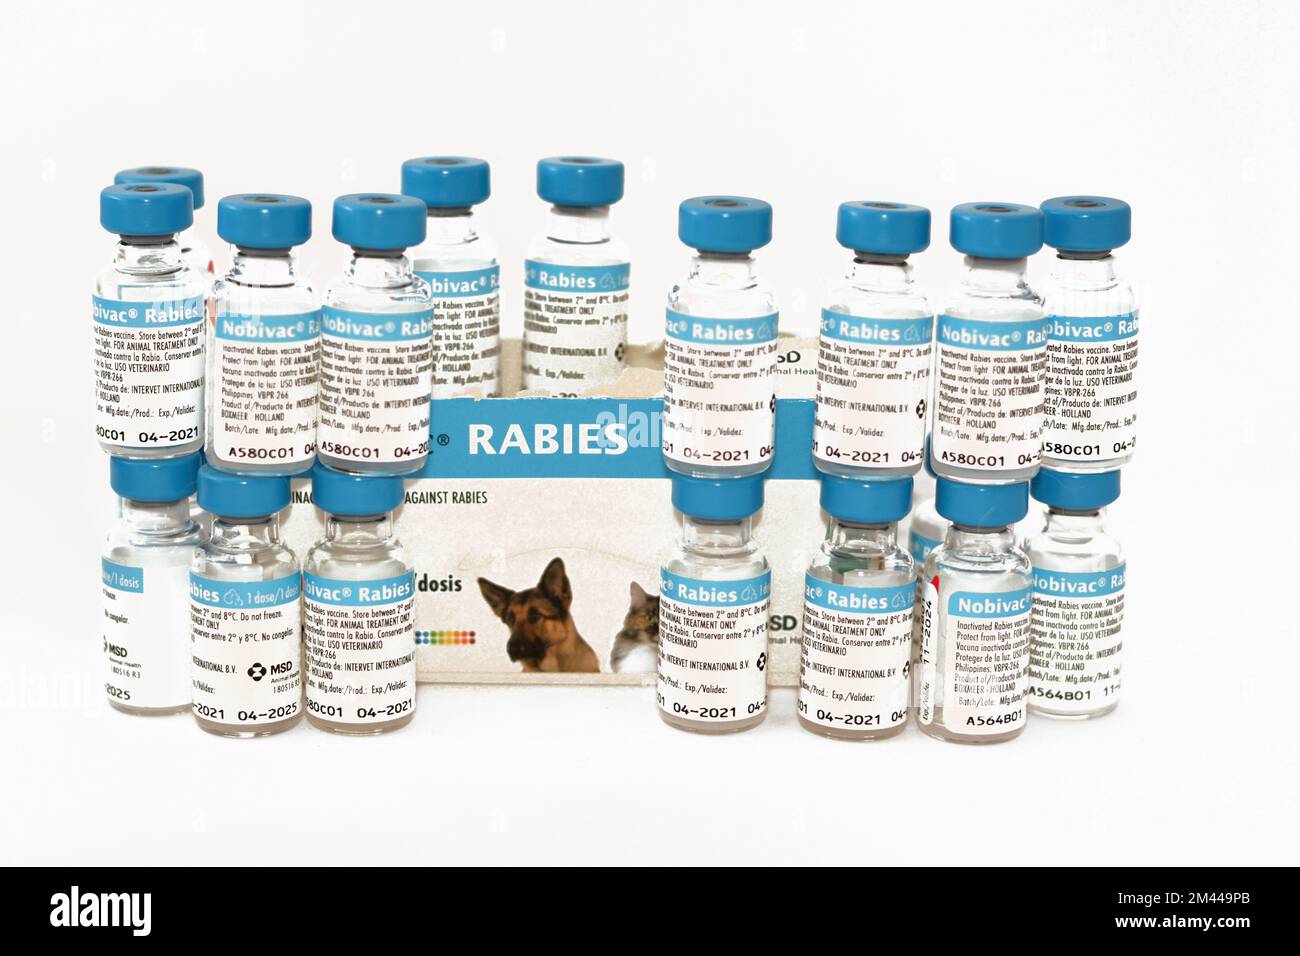 Cairo, Egypt, December 17 2022: Nobivac Rabies stable inactivated, adjuvanted vaccine against Rabies that offers complete protection administered for Stock Photo